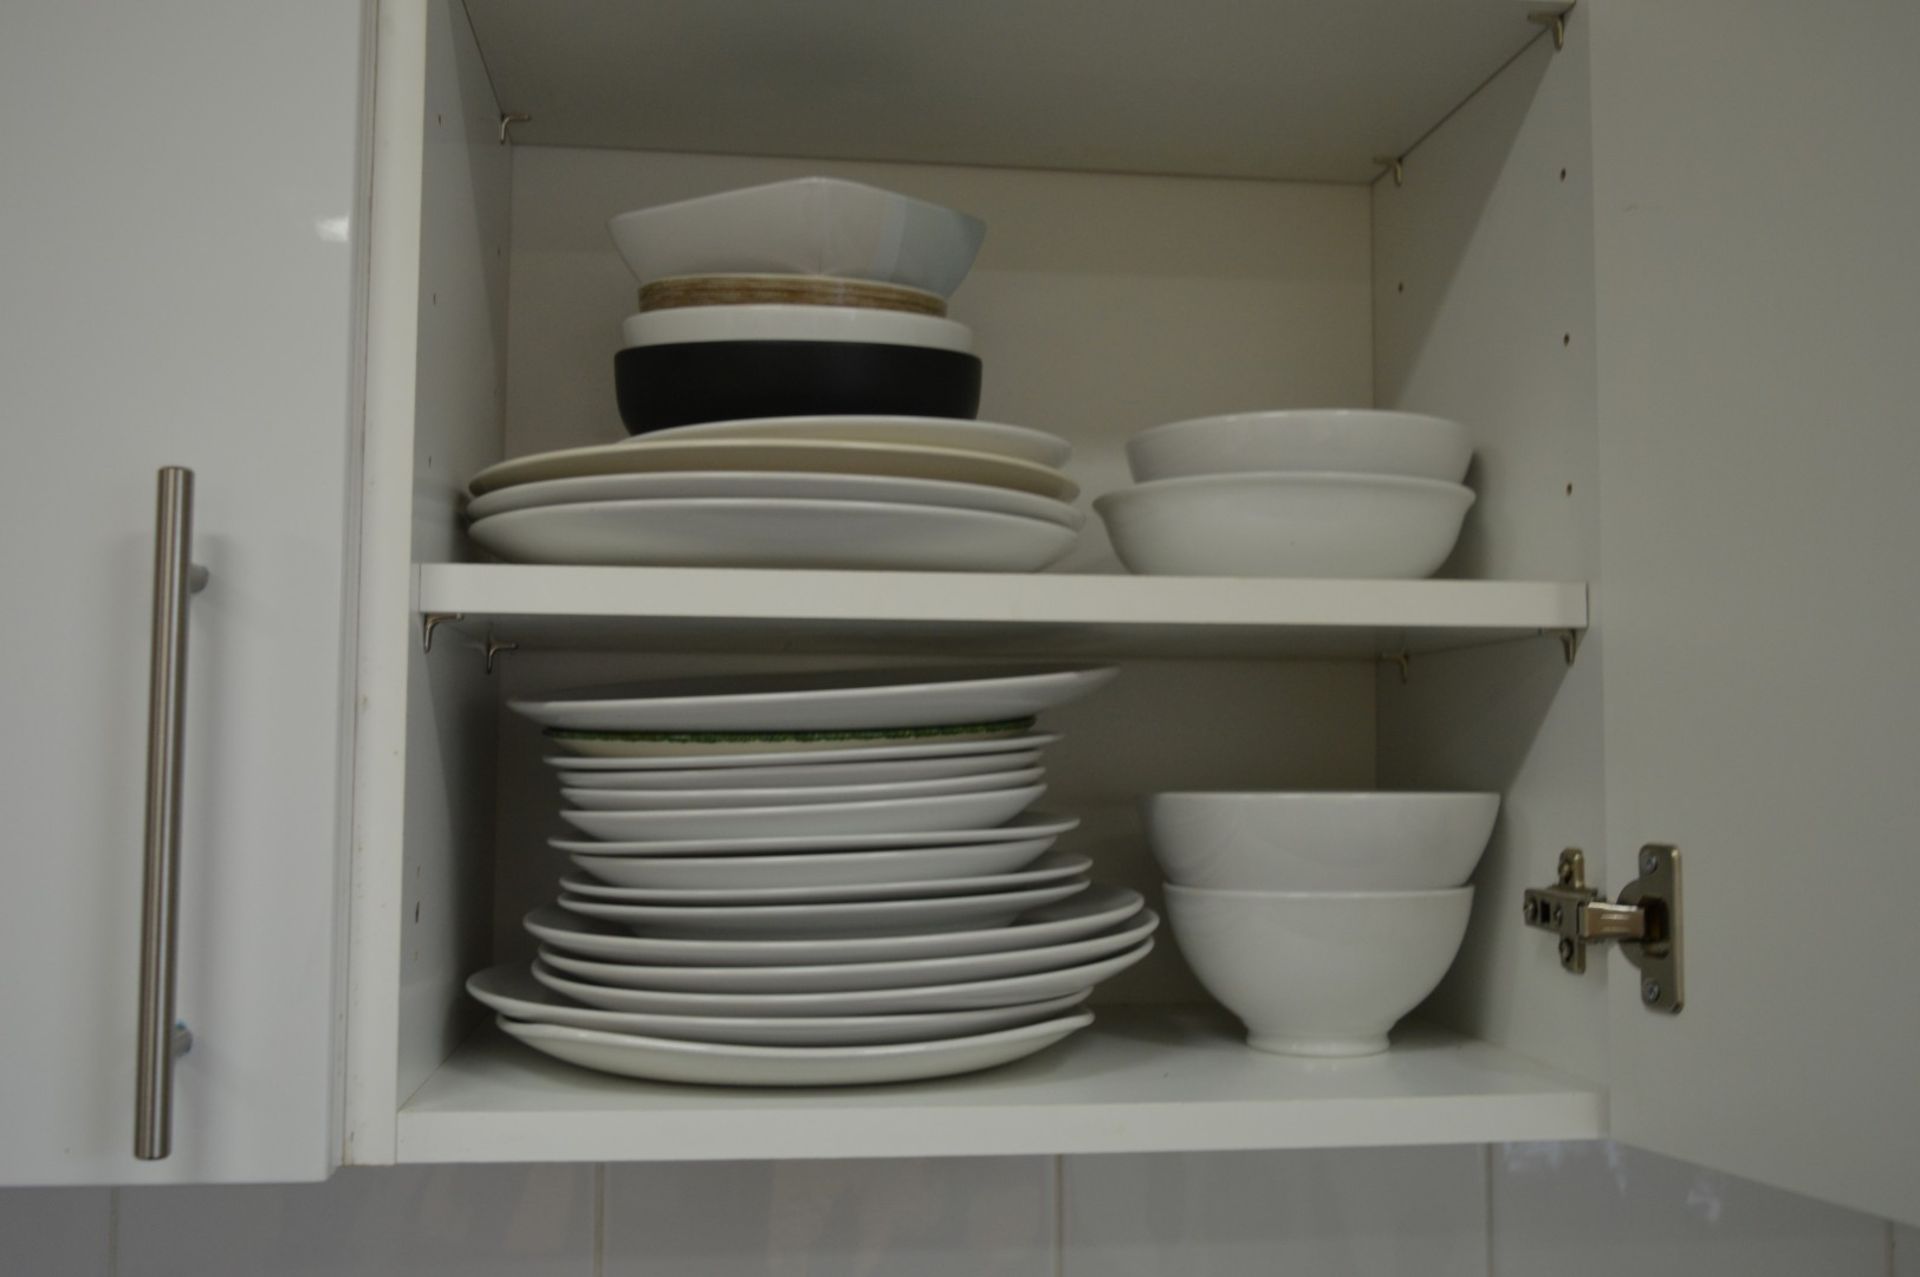 1 x Collection of Various Kitchen Accessories Including Plates, Cups, Cutlery, Chefs Knives and More - Image 4 of 4